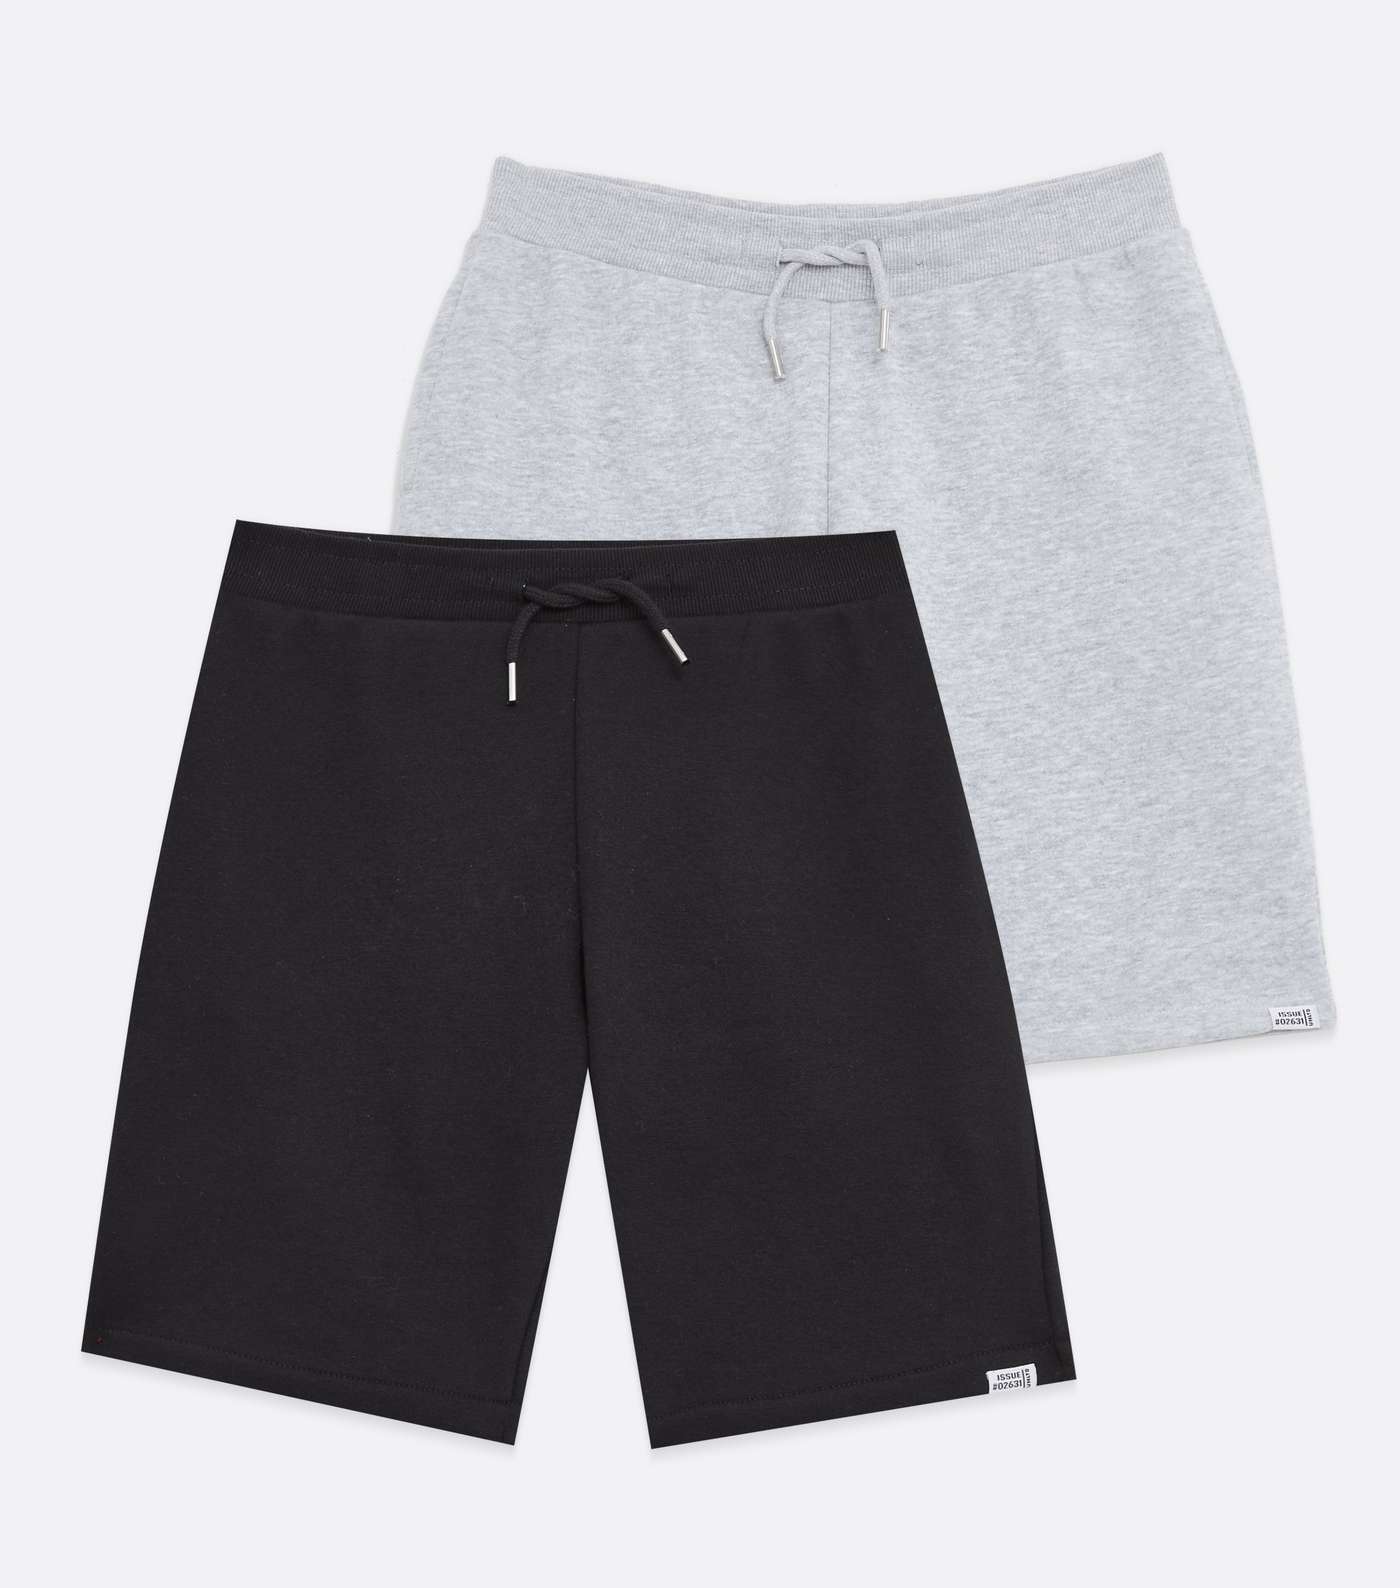 Boys 2 Pack Black and Grey Jersey Shorts Image 5